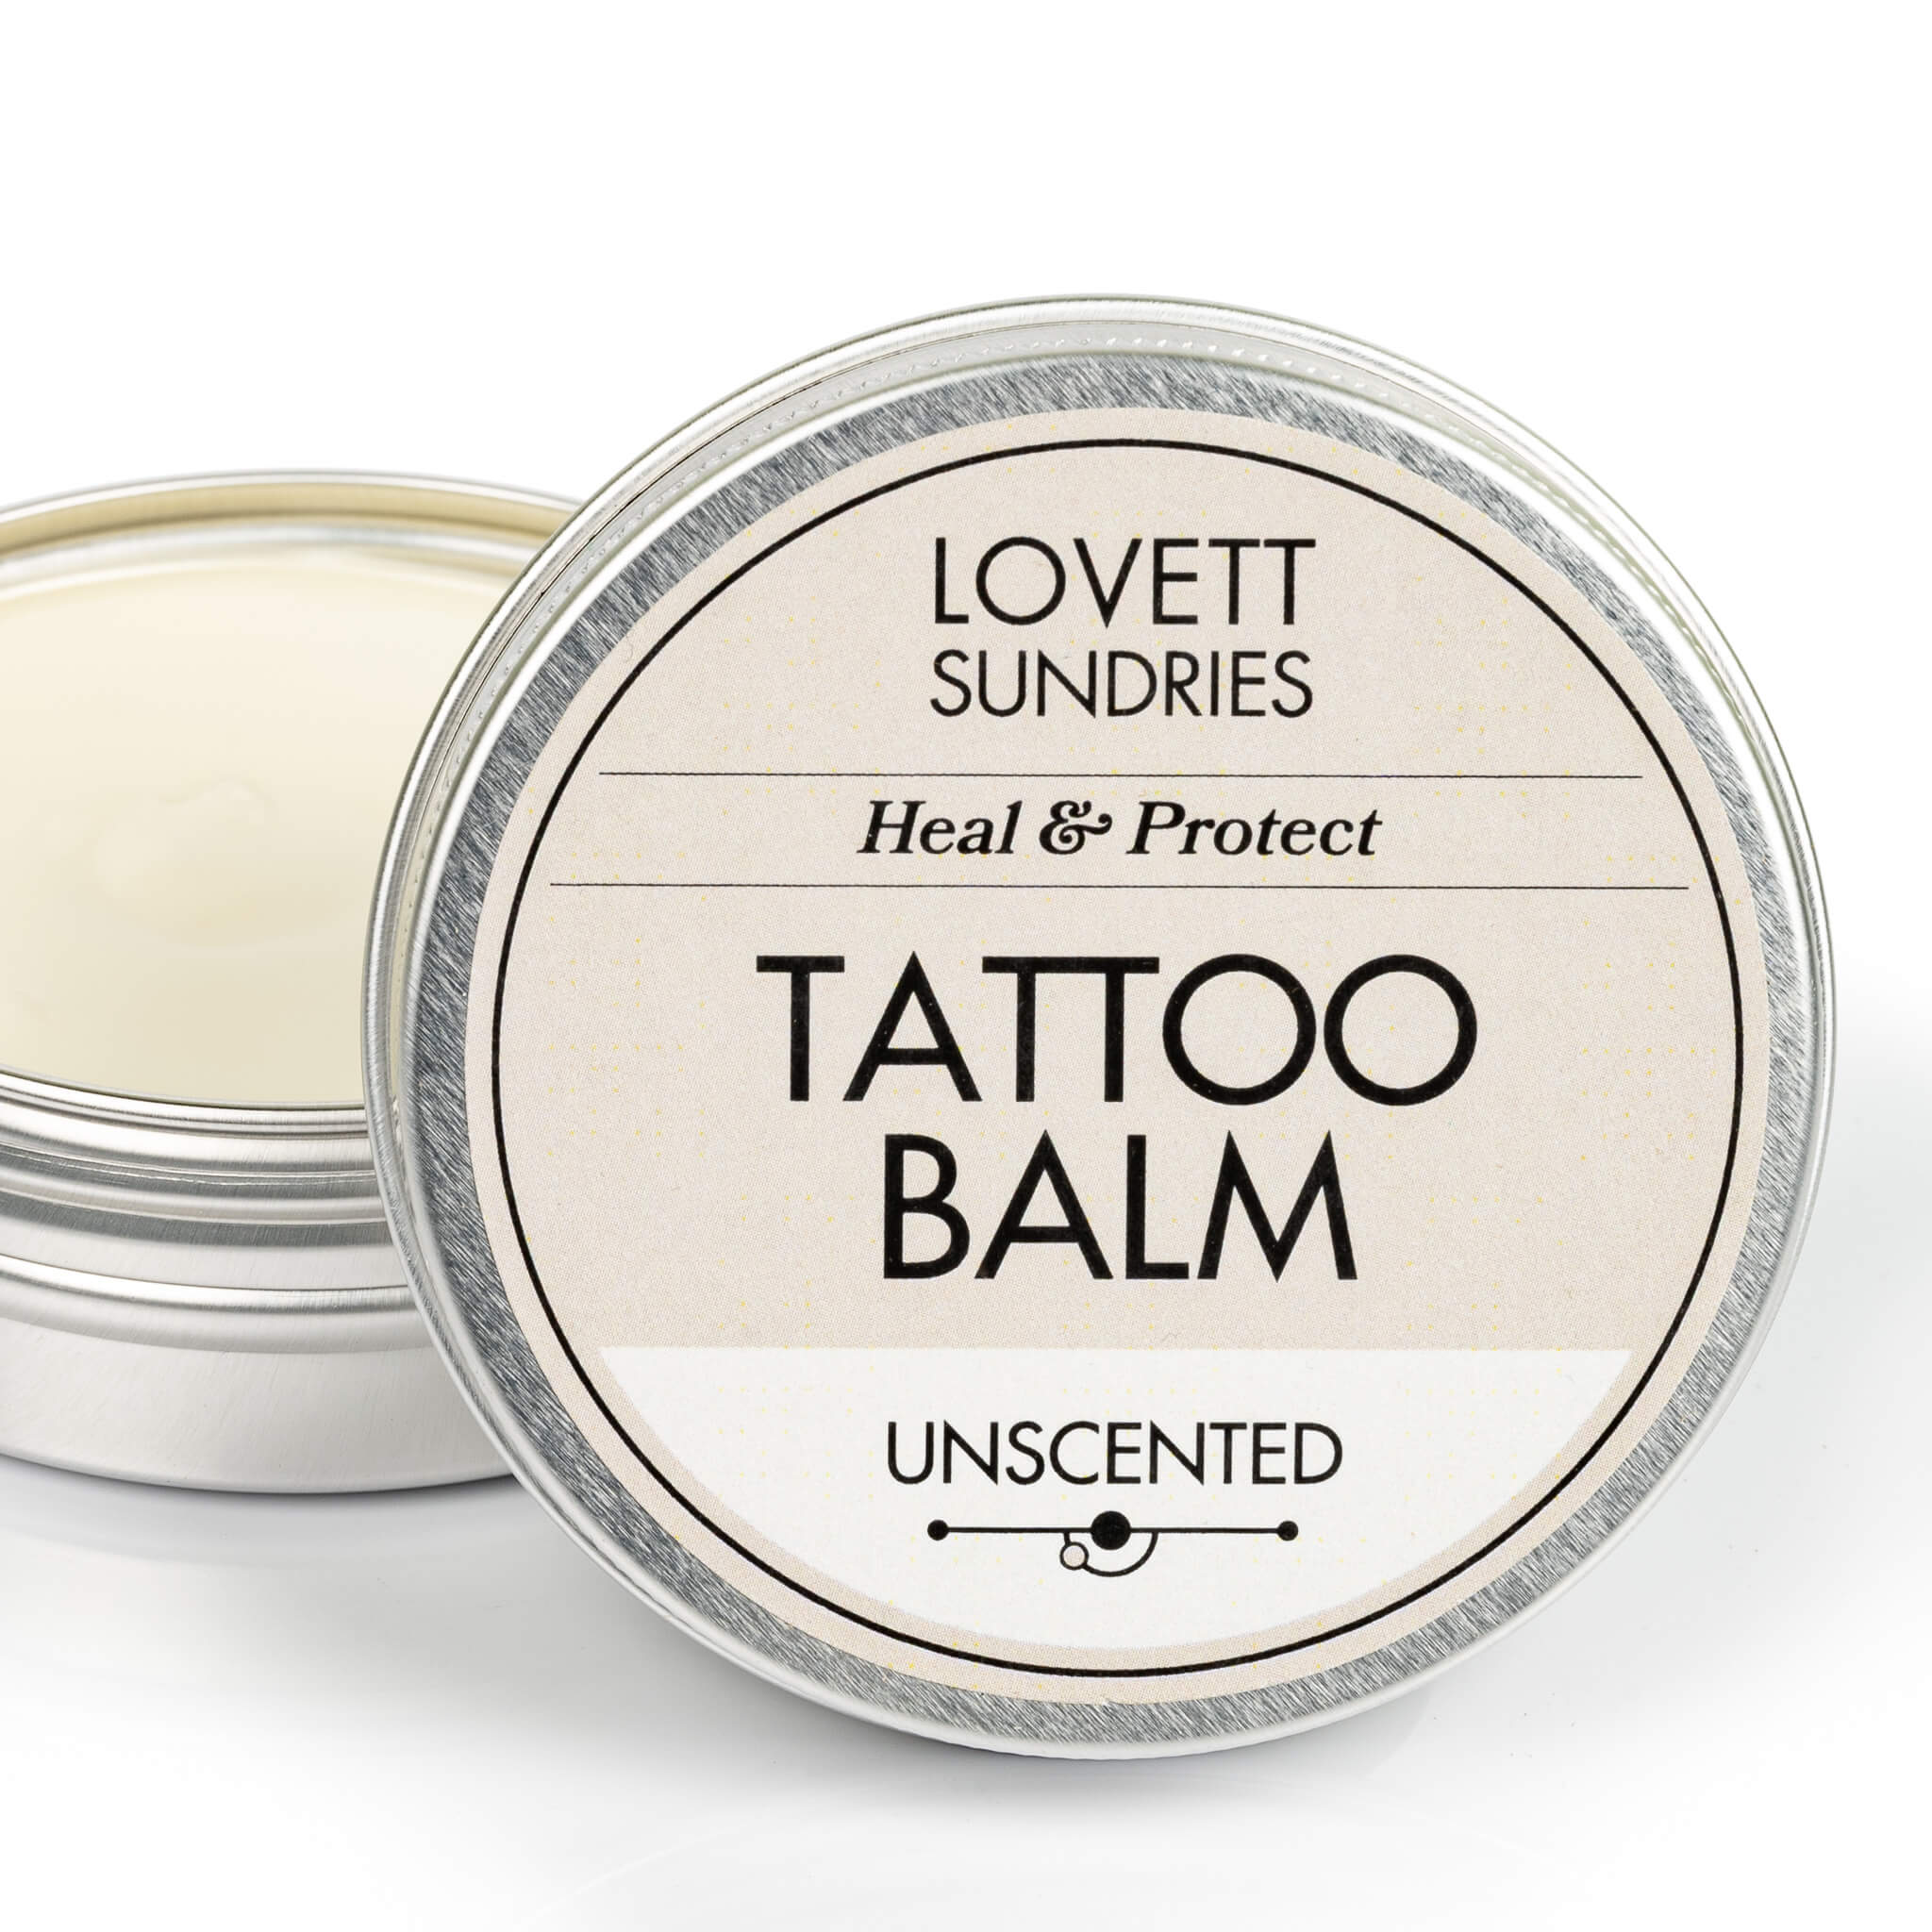 All natural unscented zero waste tattoo balm that heals and protects in a recyclable aluminum tin. 